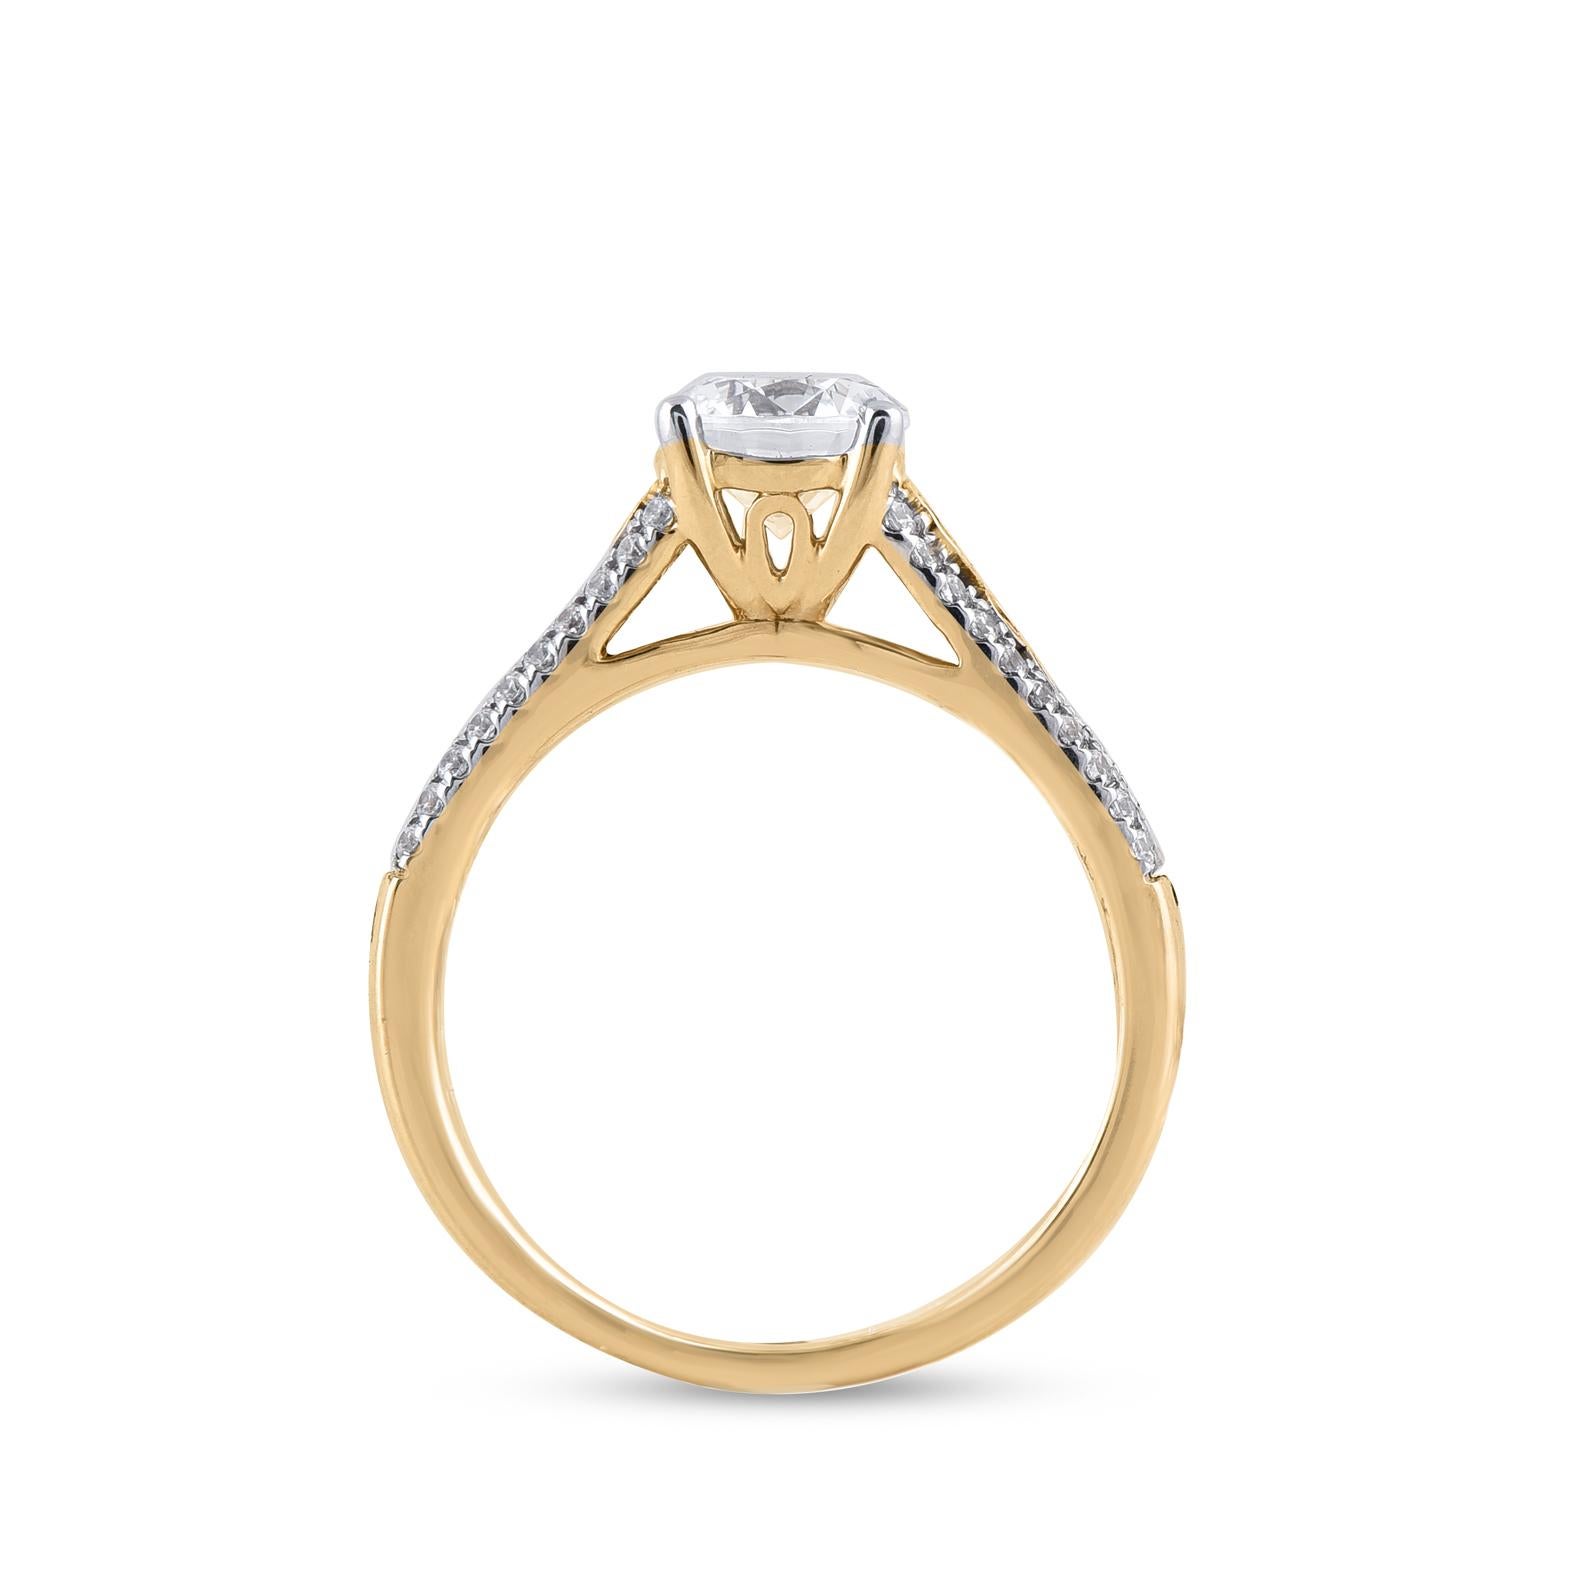 Women's TJD 1.20 Carat Round Cut Diamond 14KT Yellow Gold Vintage Style Engagement Ring For Sale